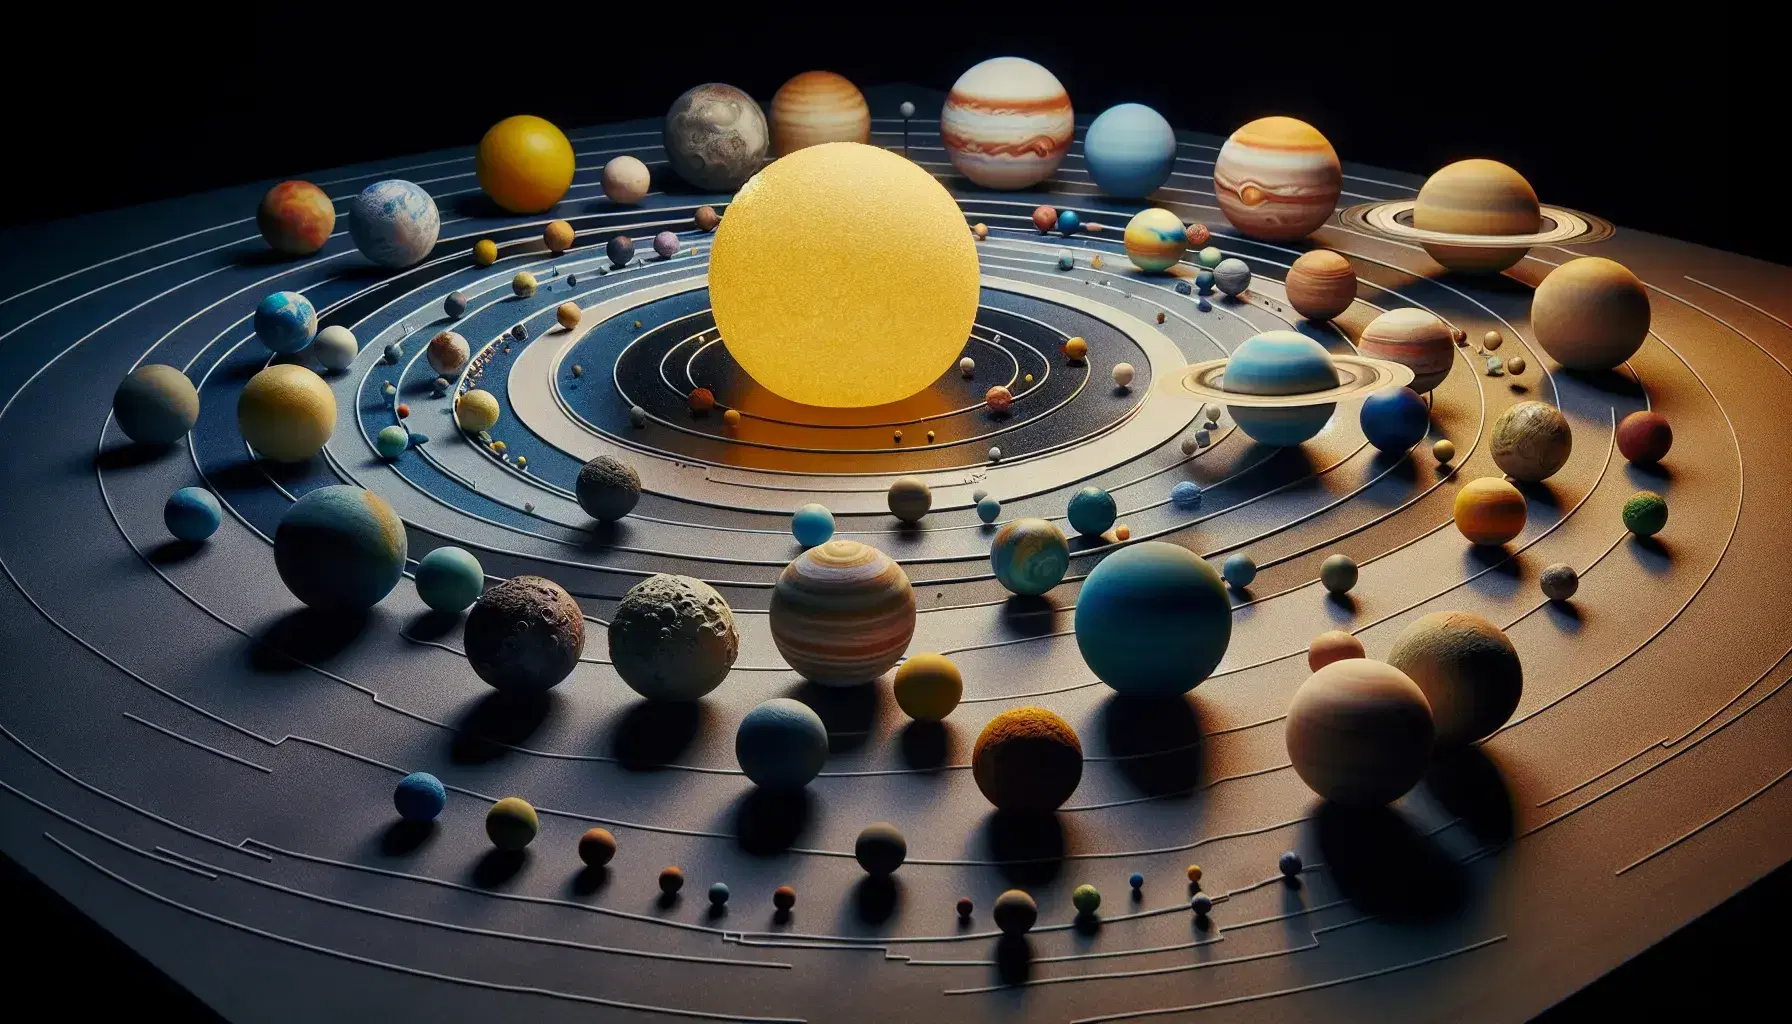 Scale model of the solar system on dark surface with yellow Sun, colorful planets and rings of Saturn, without stars in the background.